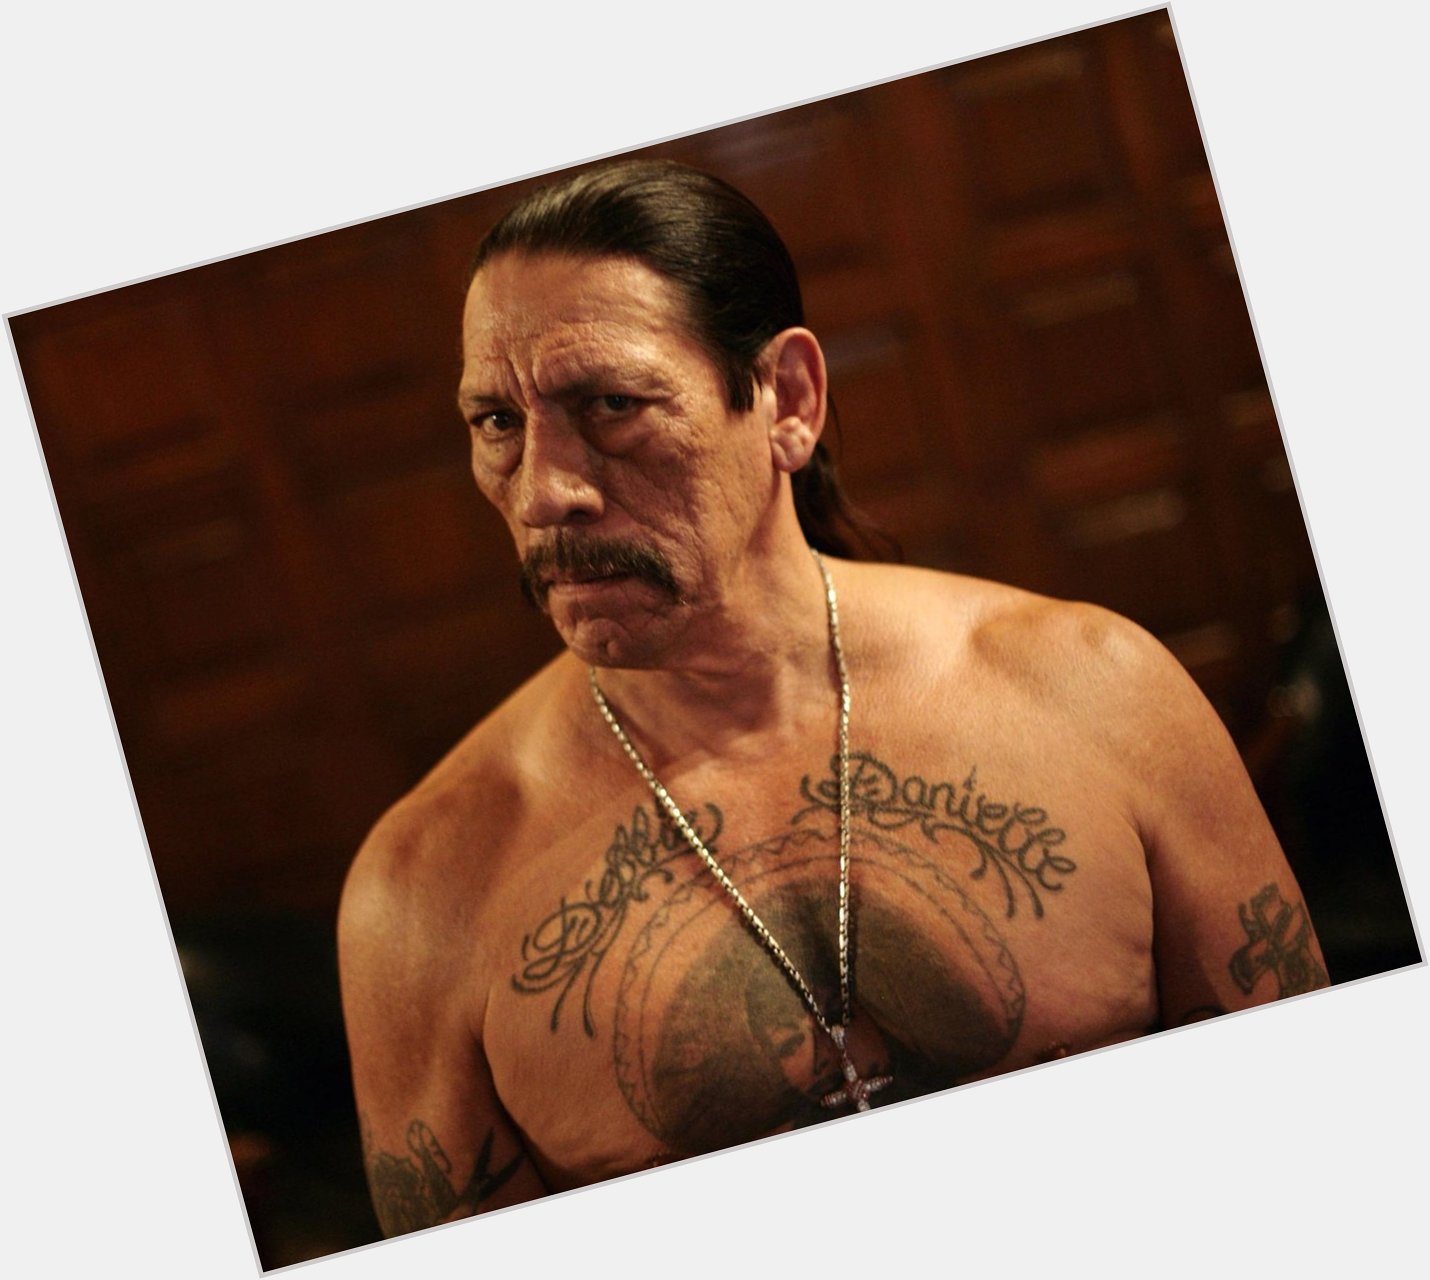 Wishing the one and only DANNY TREJO a happy birthday today! 